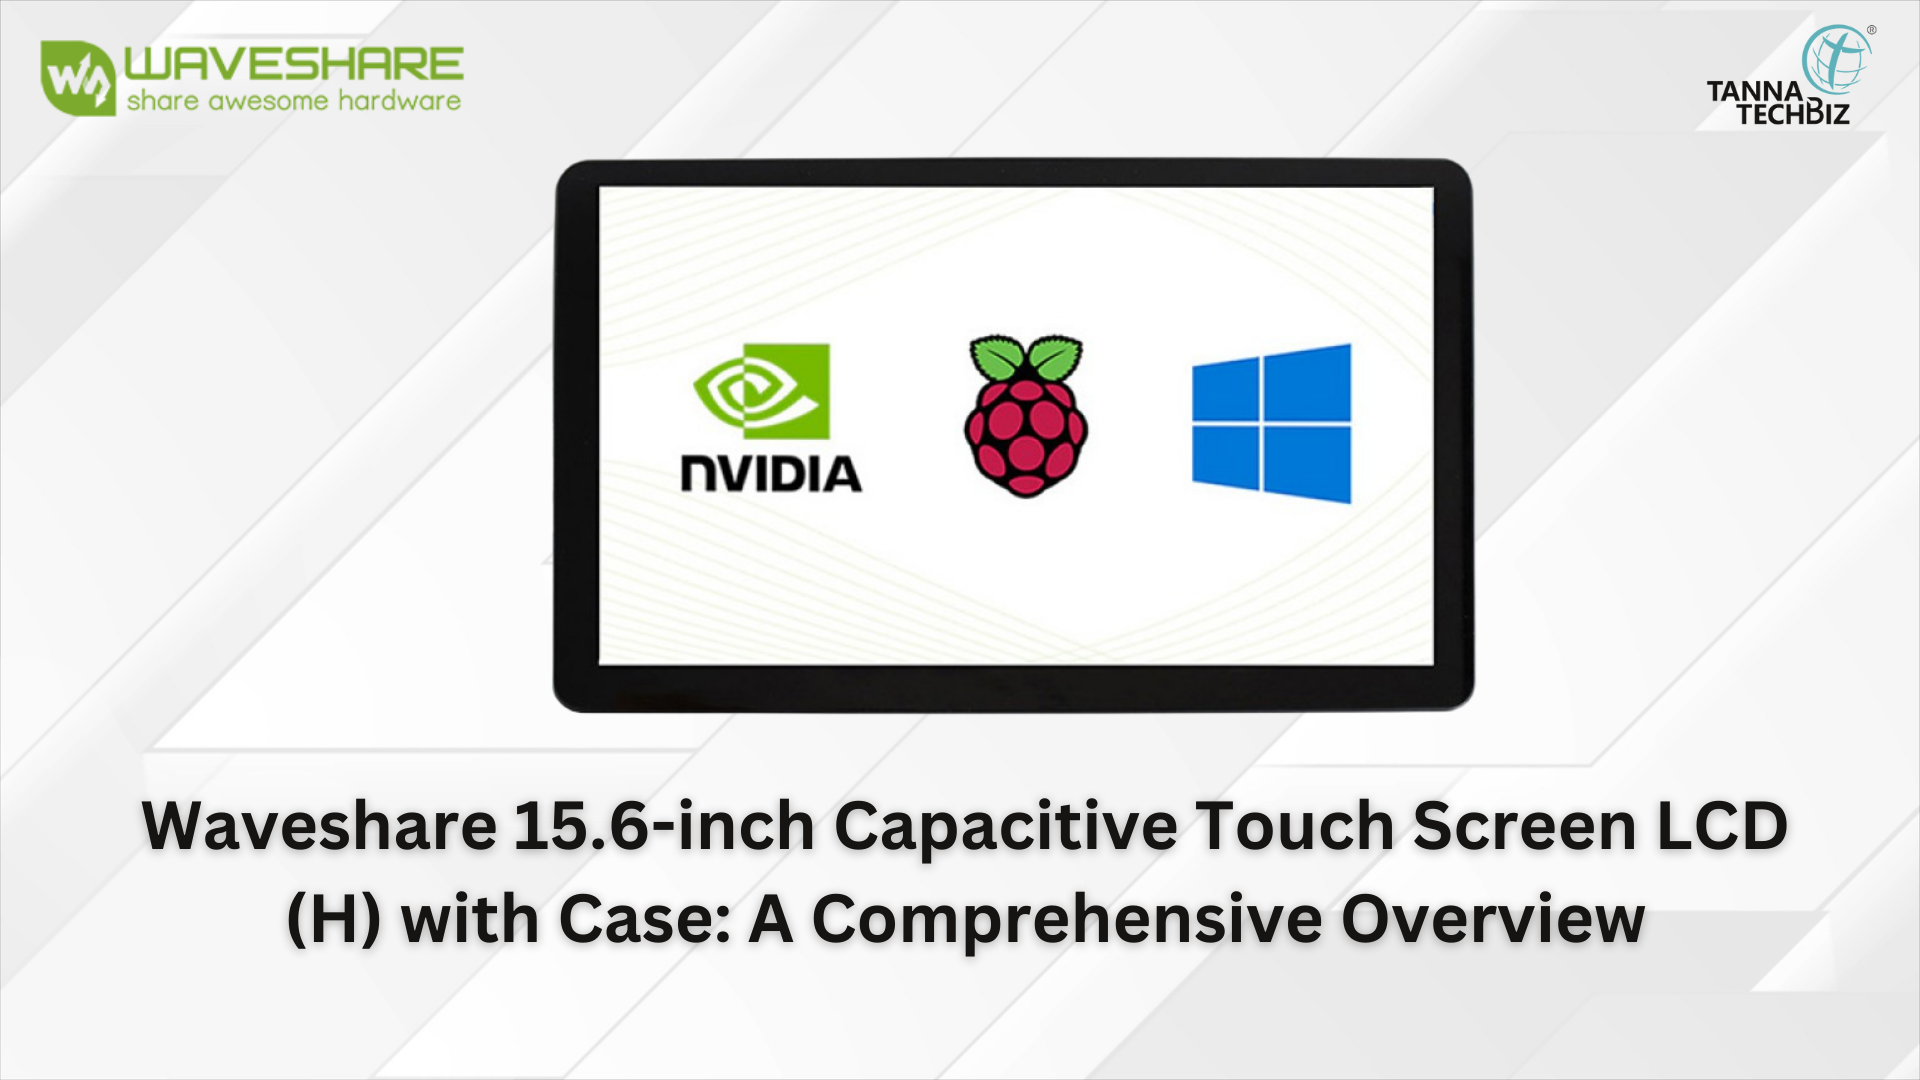 Waveshare 15.6-inch Capacitive Touch Screen LCD (H) with Case: A Comprehensive Overview